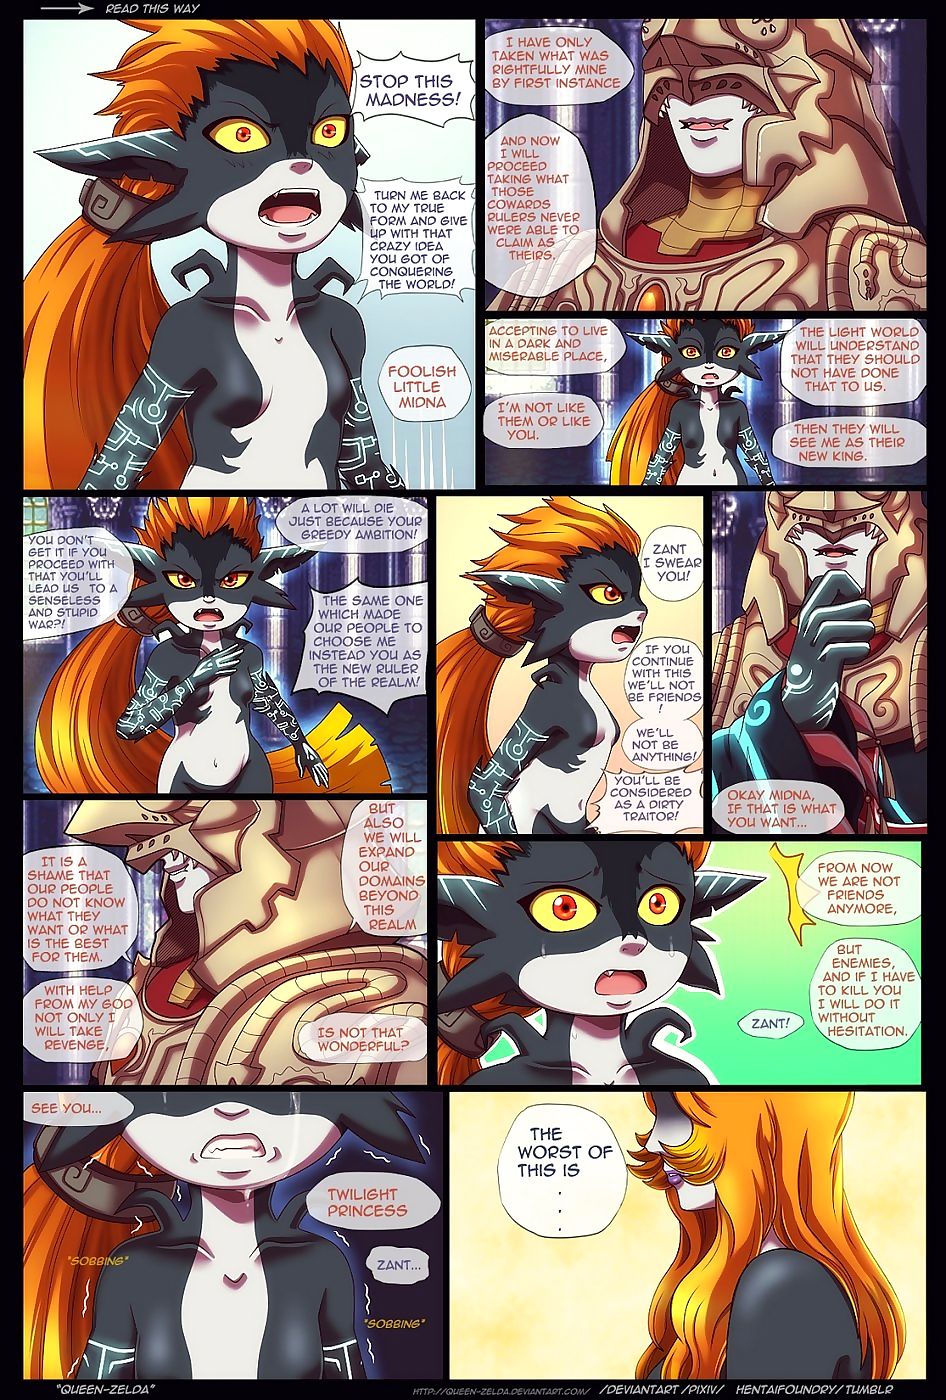 Queen Zelda- Hail to Princess page 1